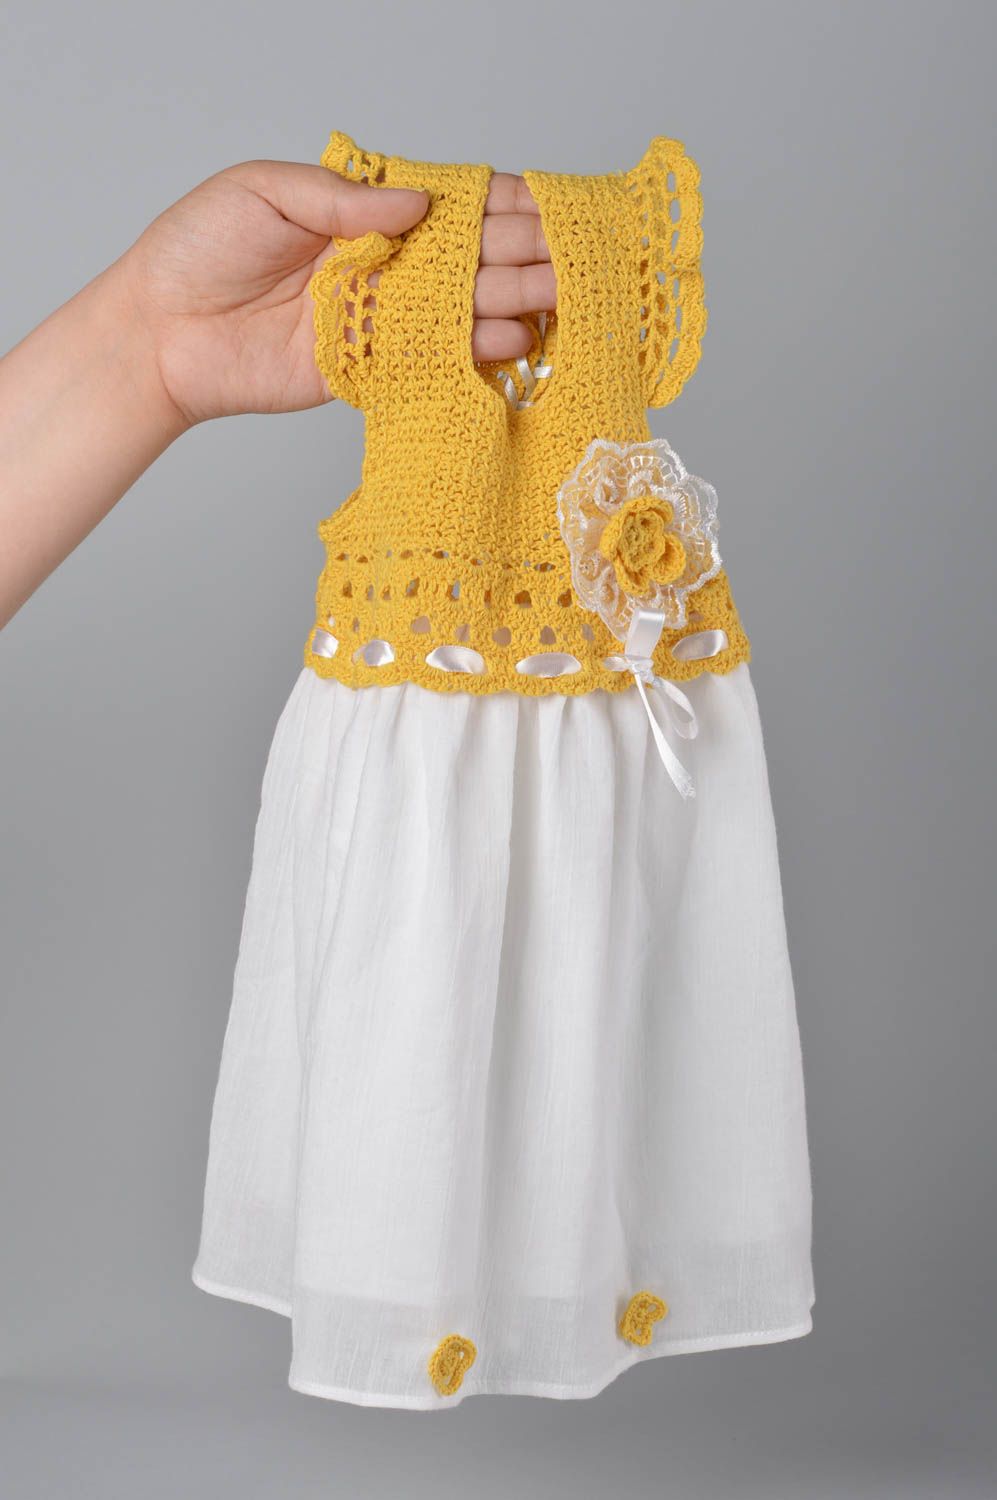 Handmade crocheted dress children clothes beautiful clothes for kids photo 1